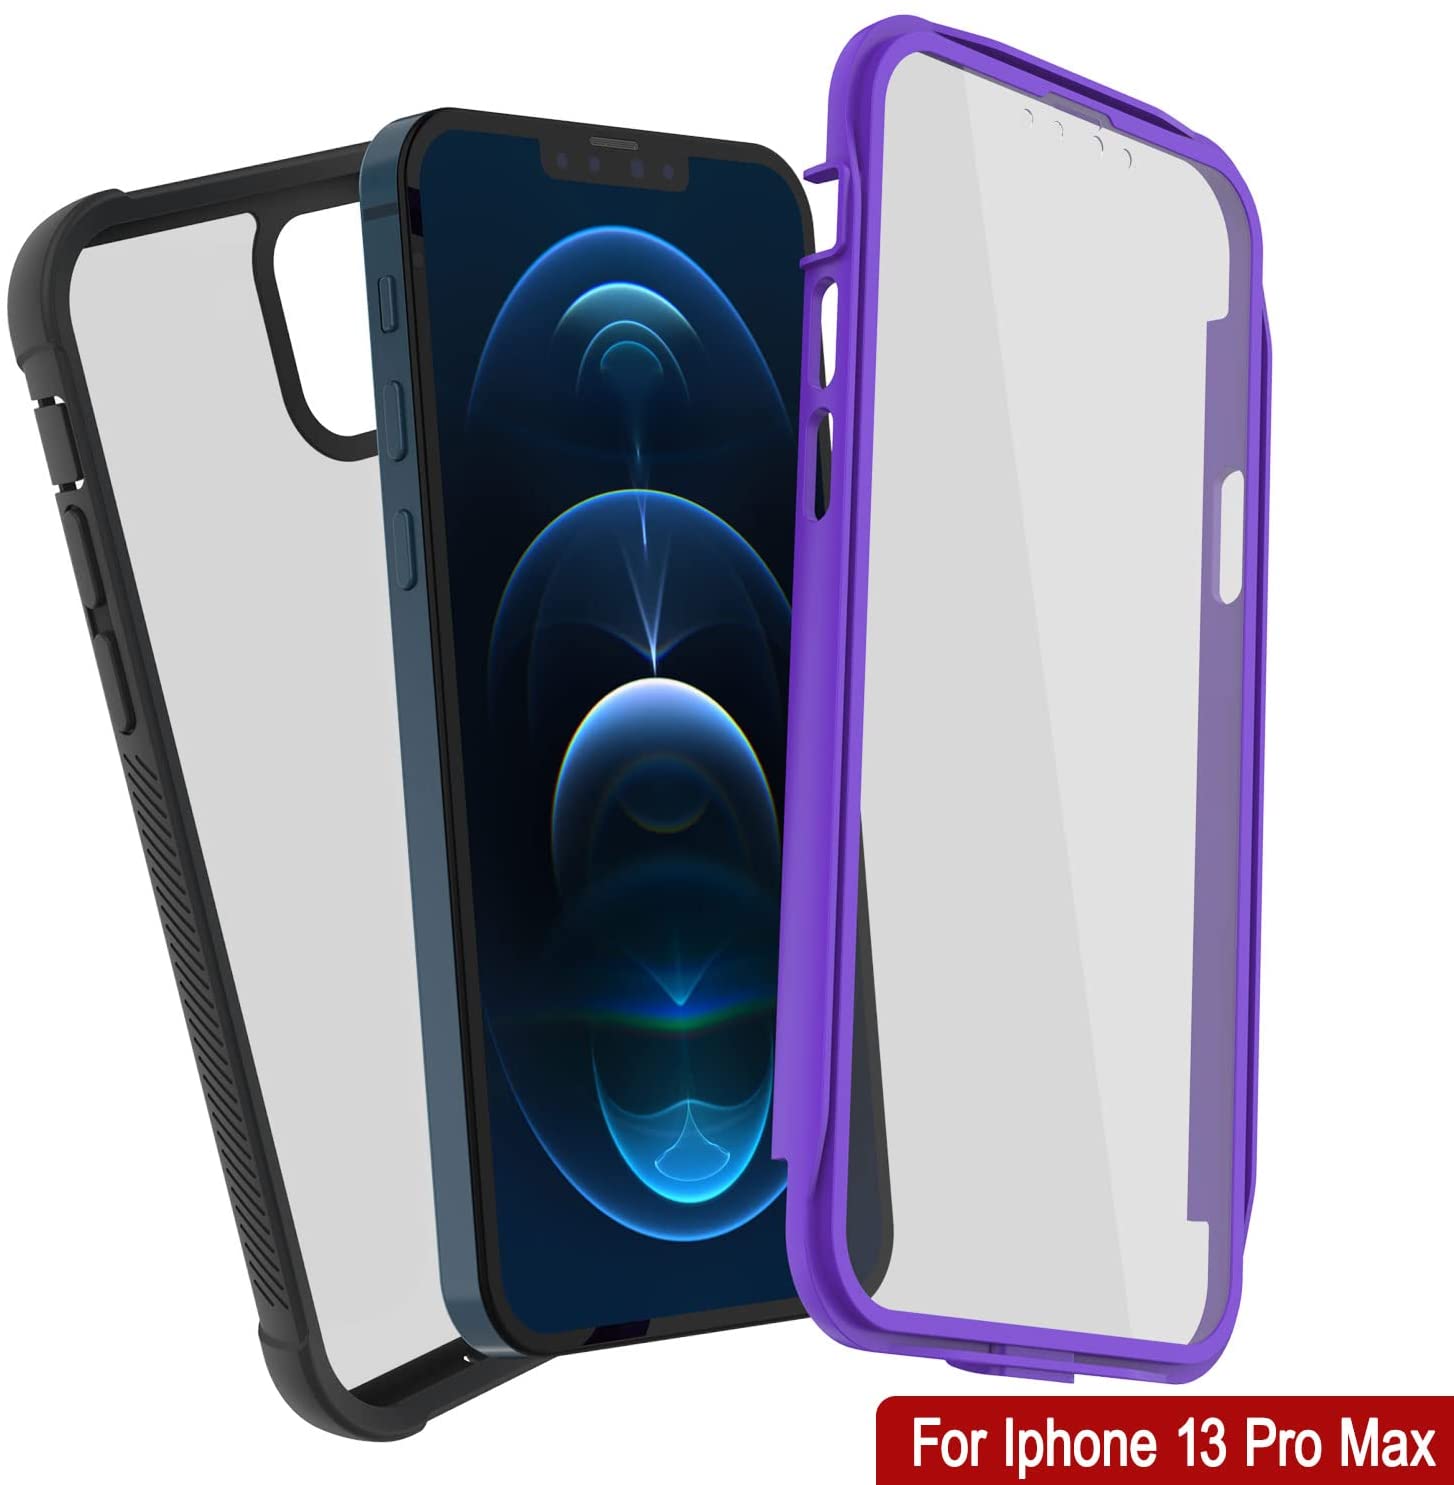 Tough Clear Case + Screen Protector - iPhone 13 Pro Max